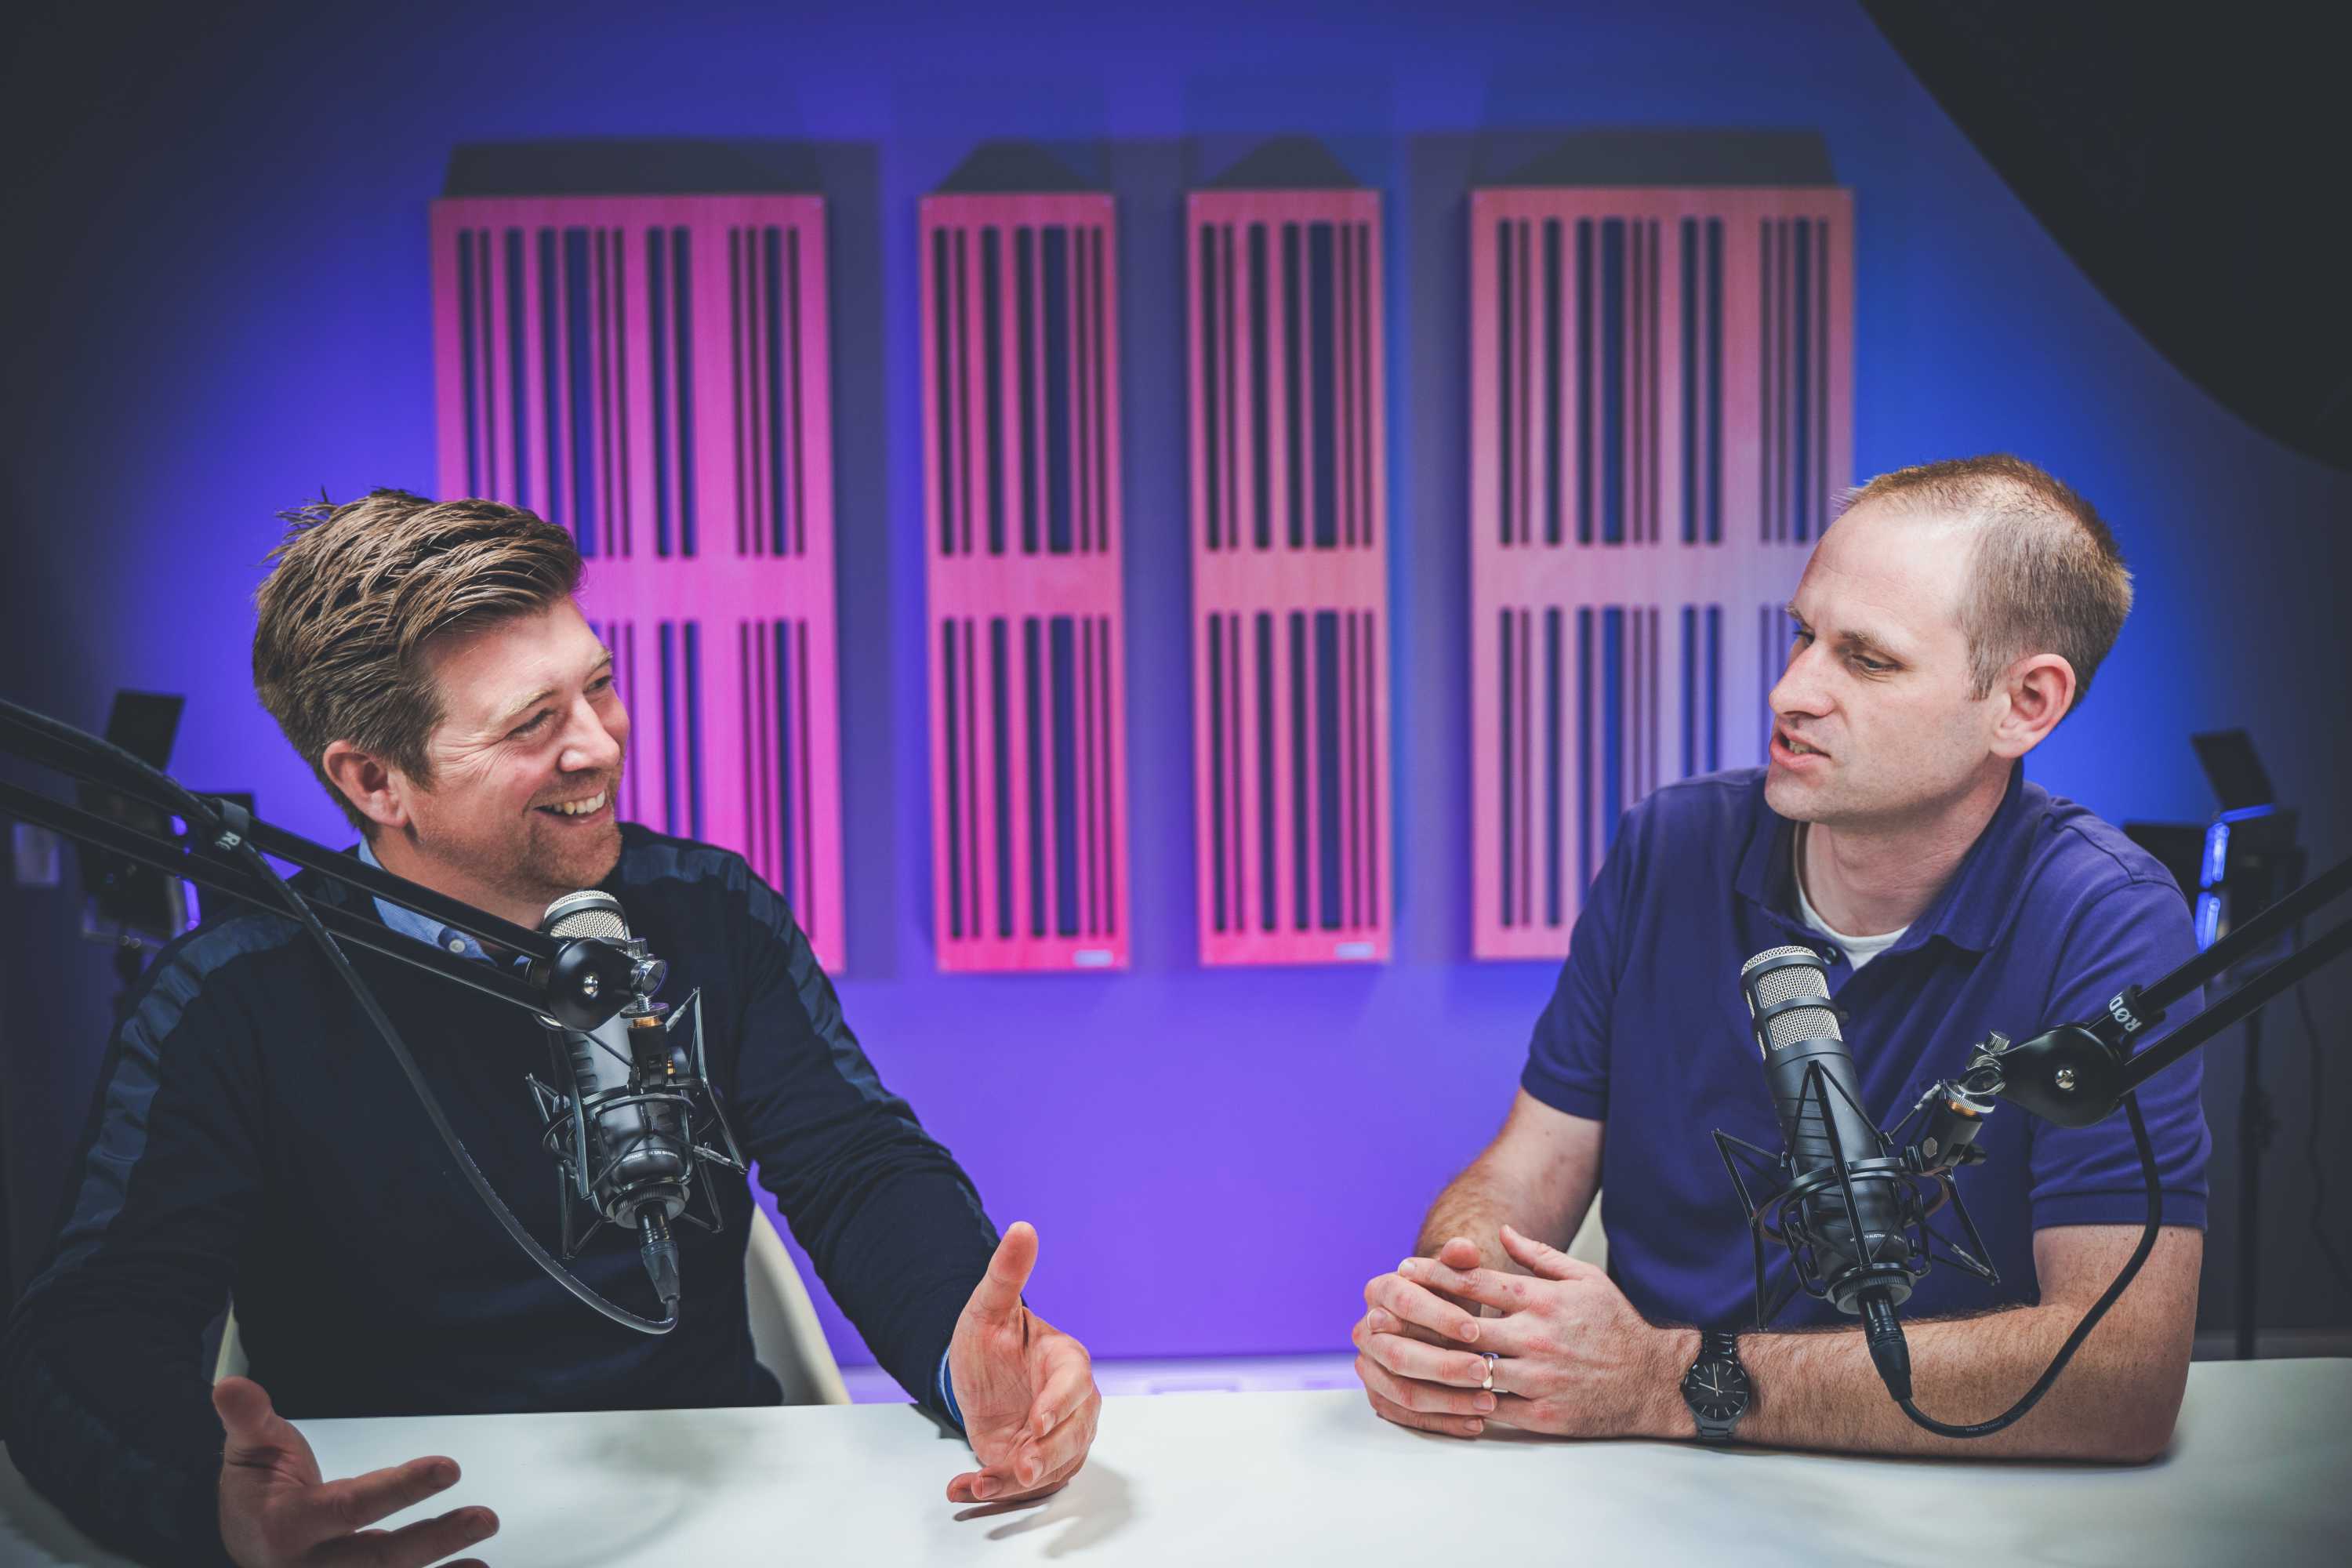 Two podcast presenters gesture whilst filming a discussion, the presenter on the left is smiling.